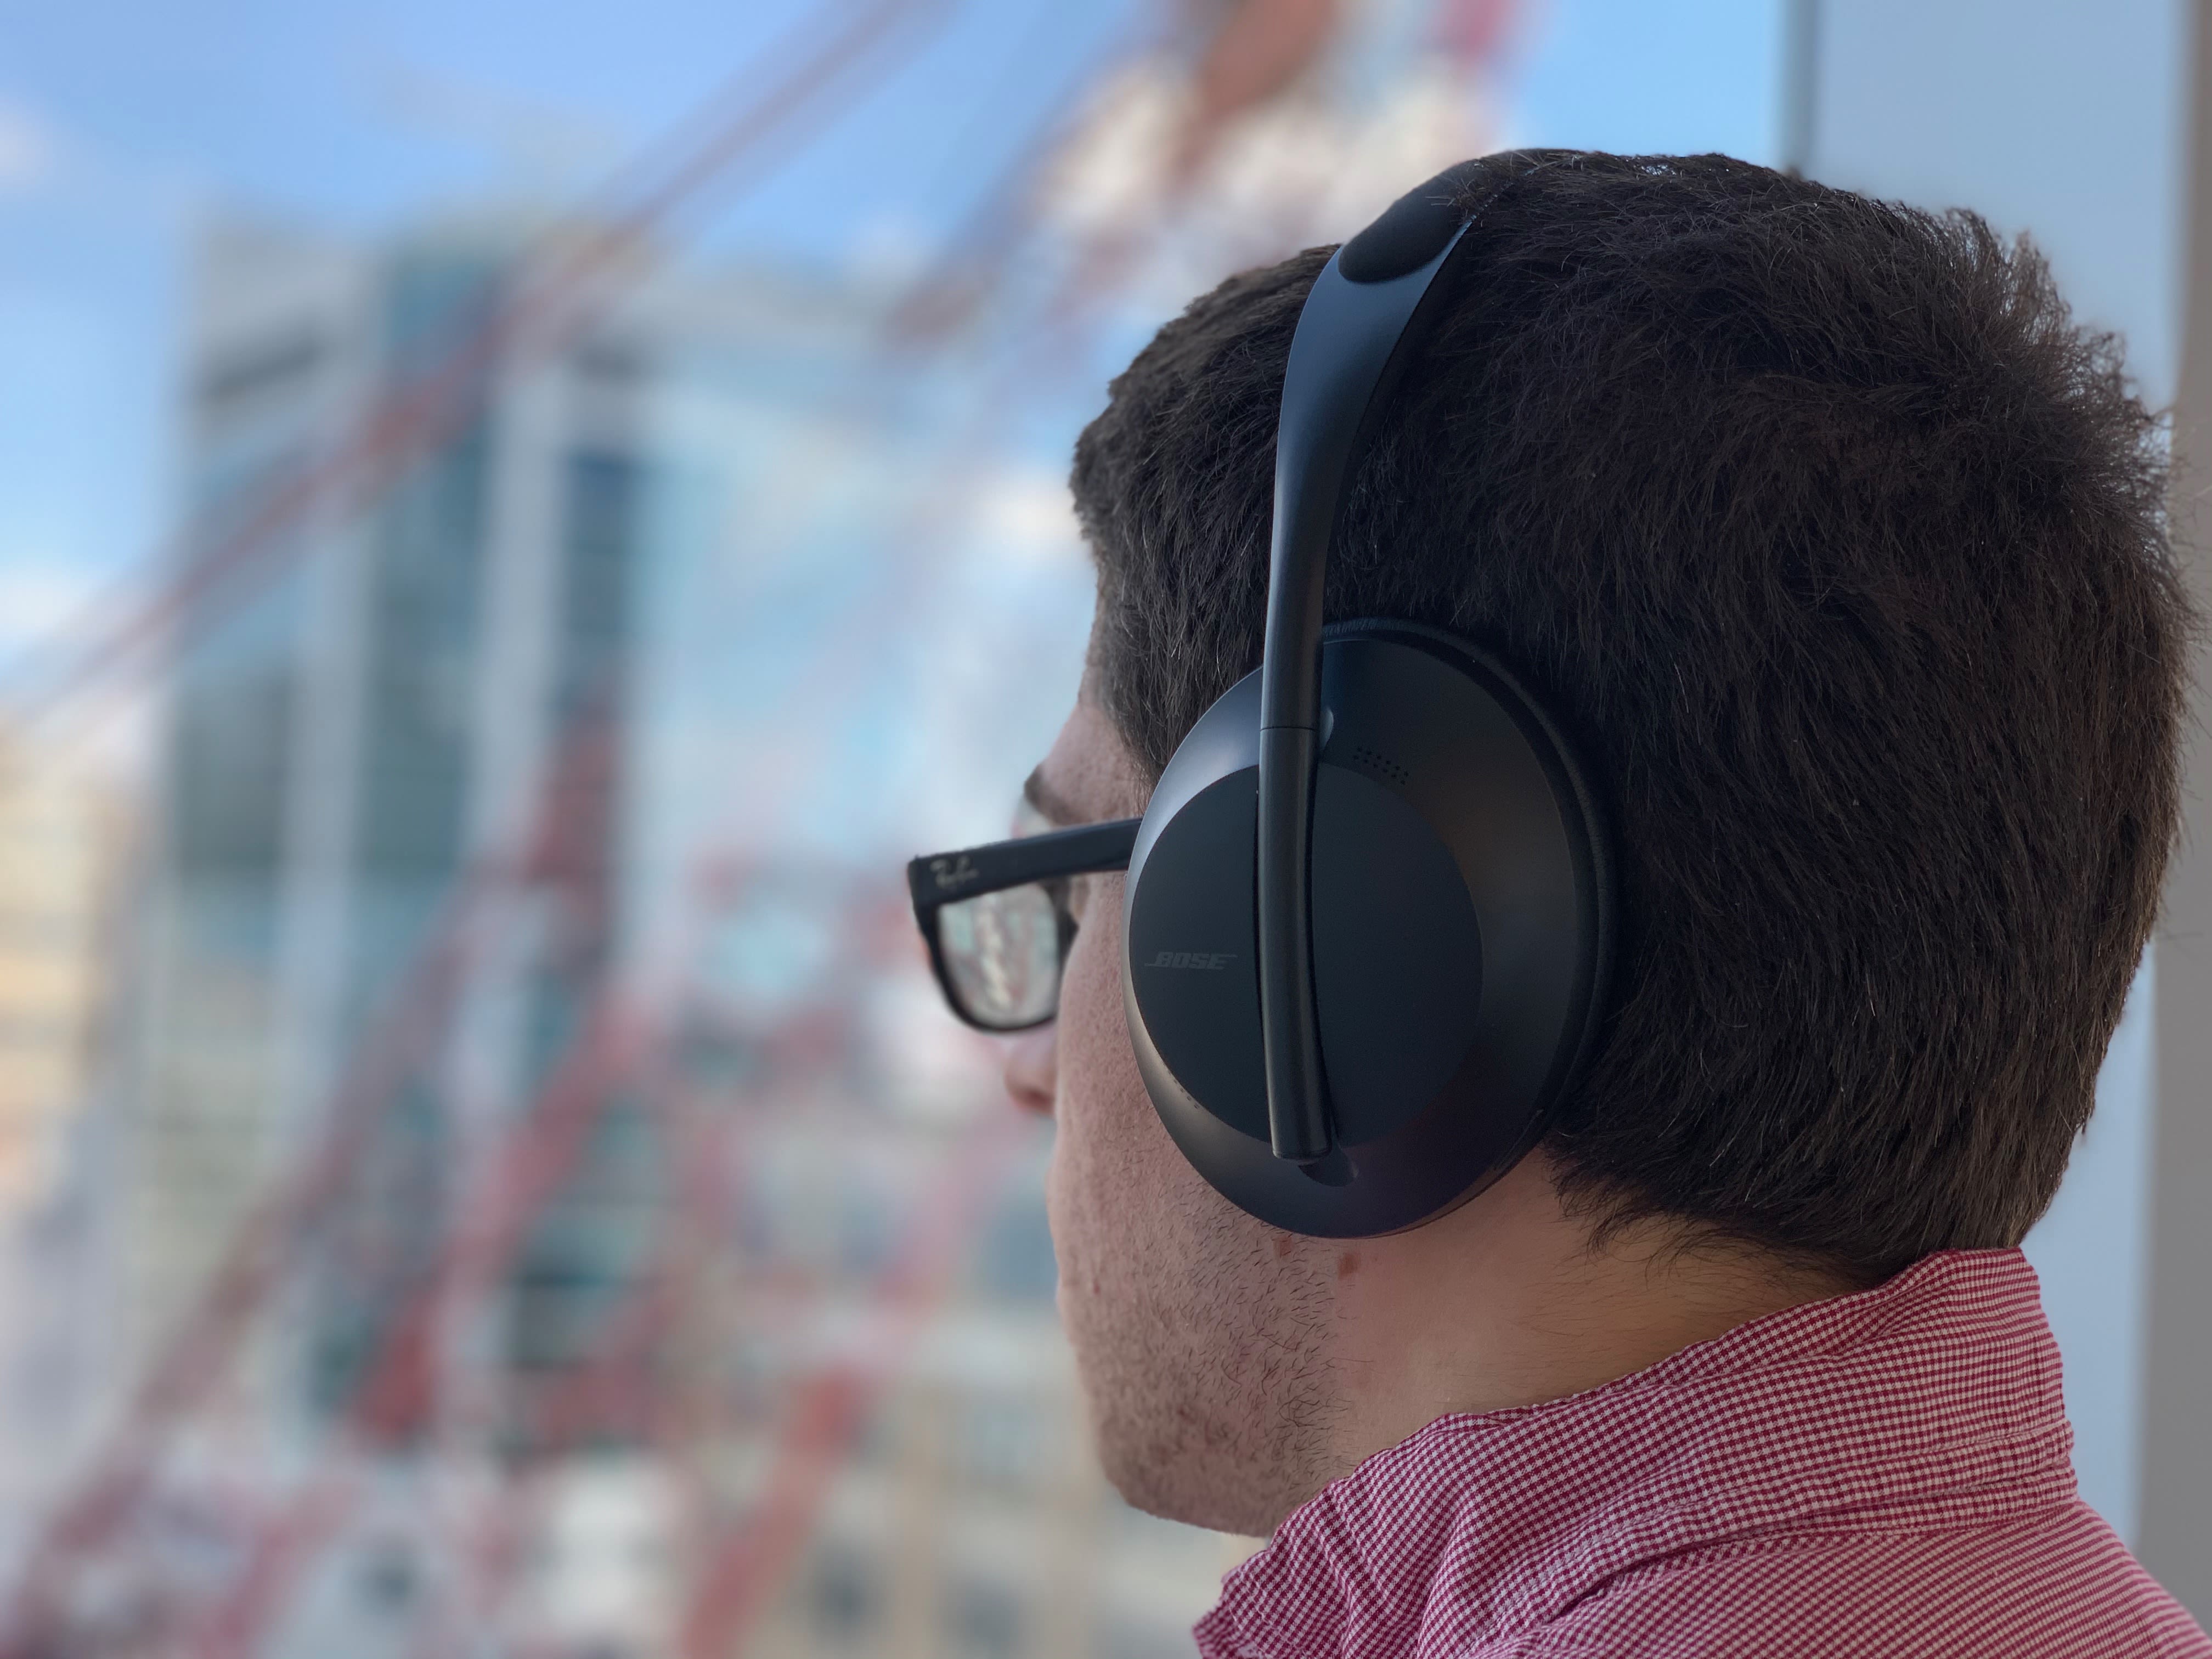 Bose Noise Cancelling Headphones 700 review: Stylish ANC over-ears